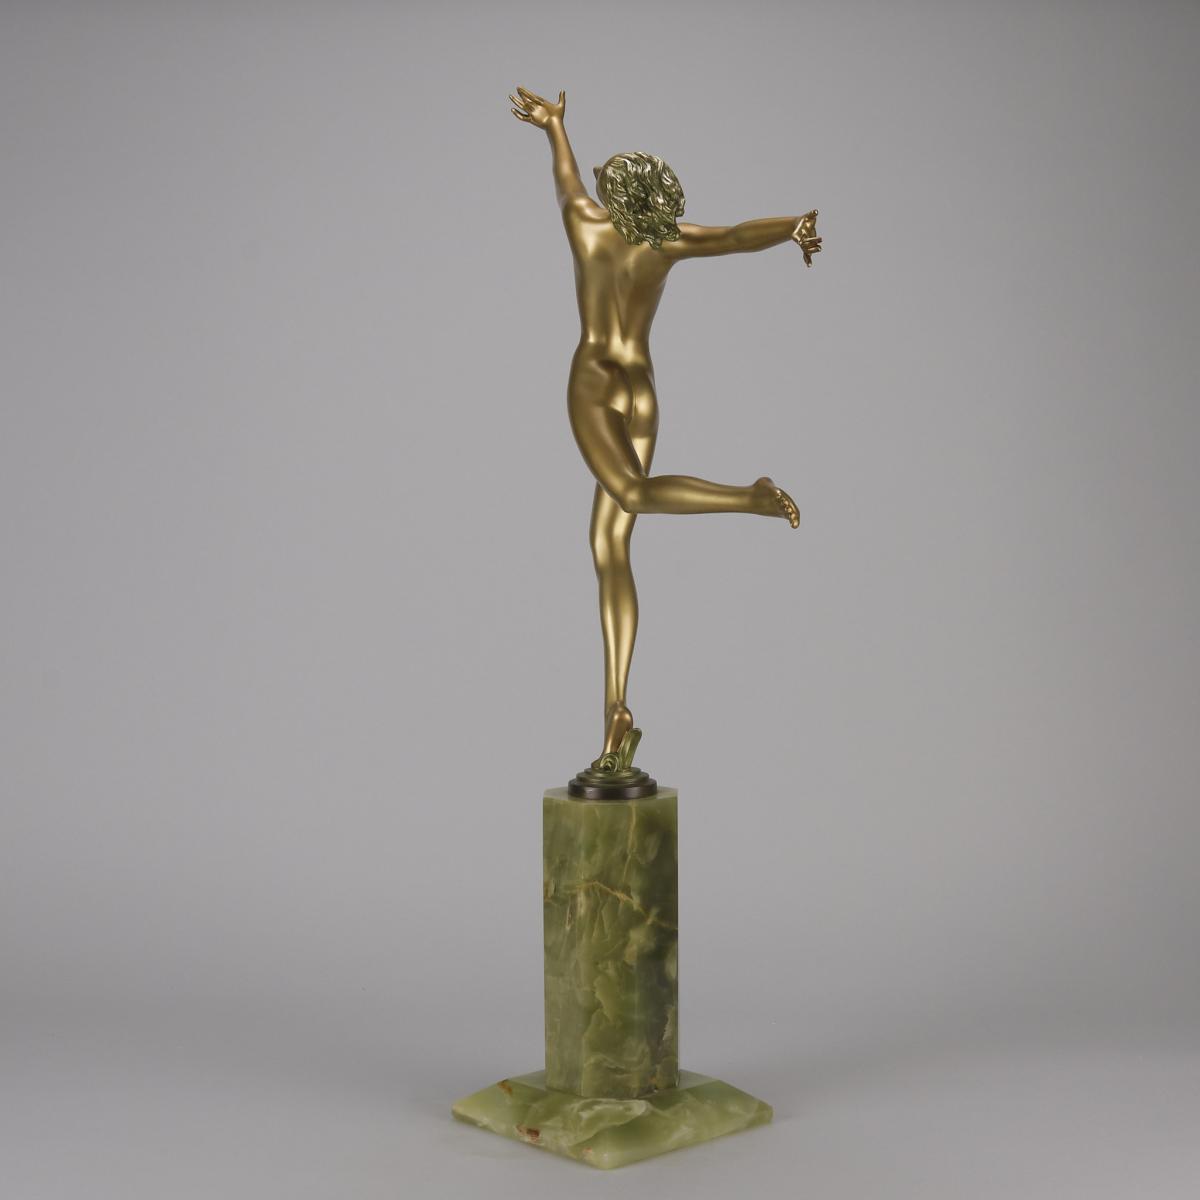 Early 20th Century Cold-Painted Bronze Sculpture "Deco Dancer" by Josef Lorenzl